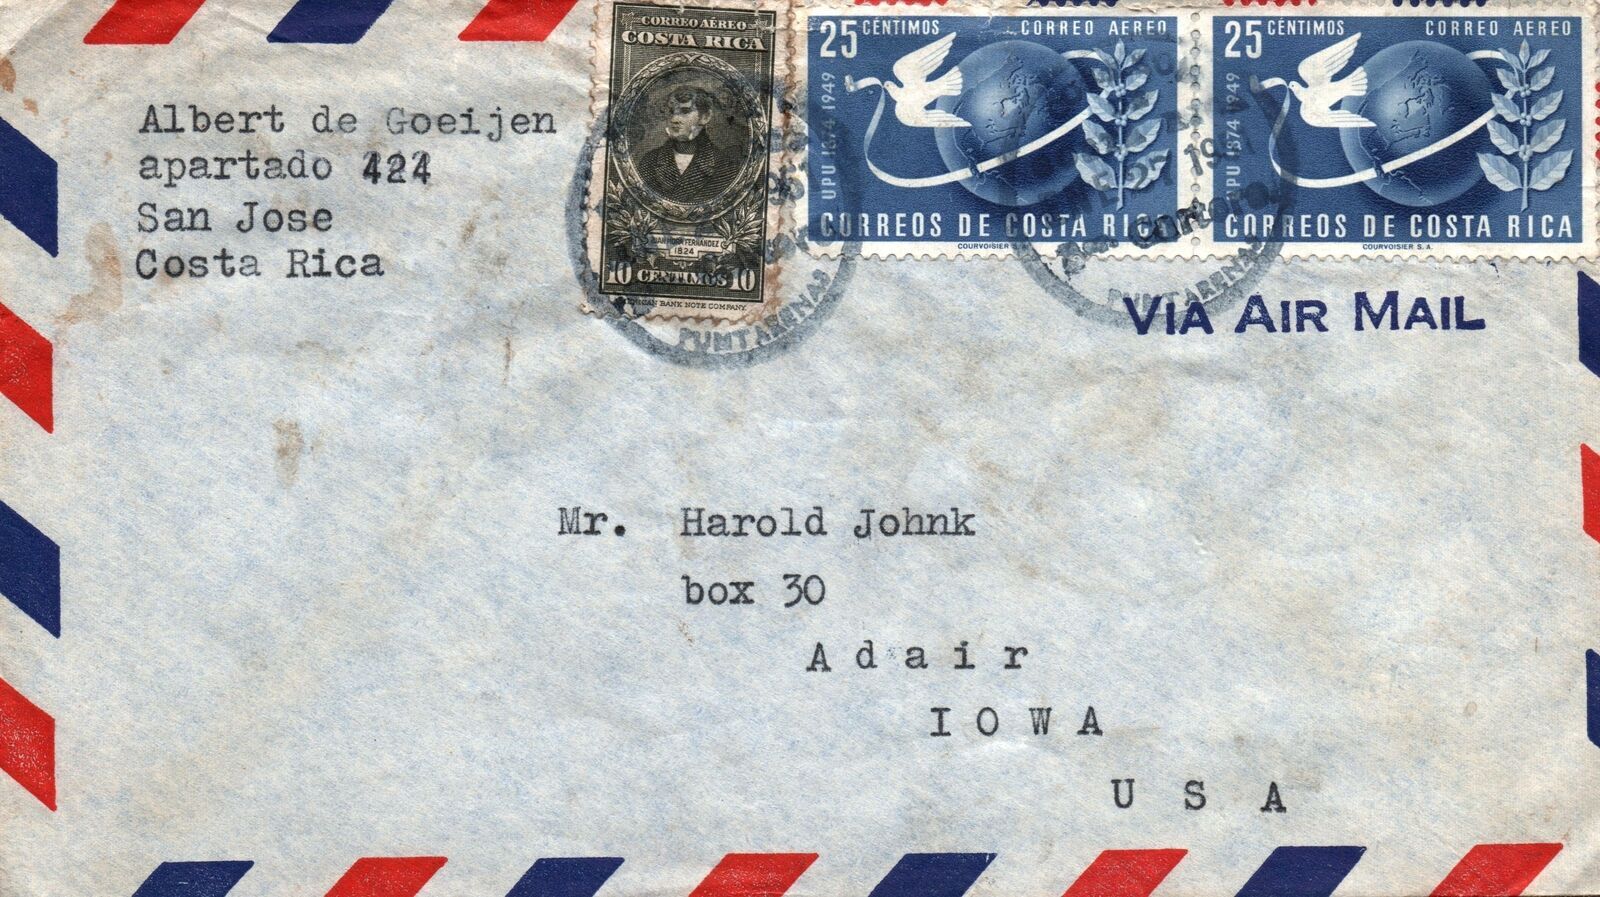 1949 Costa Rica Triple Franking Airmail Rate to U.S.a. 40 Centimos